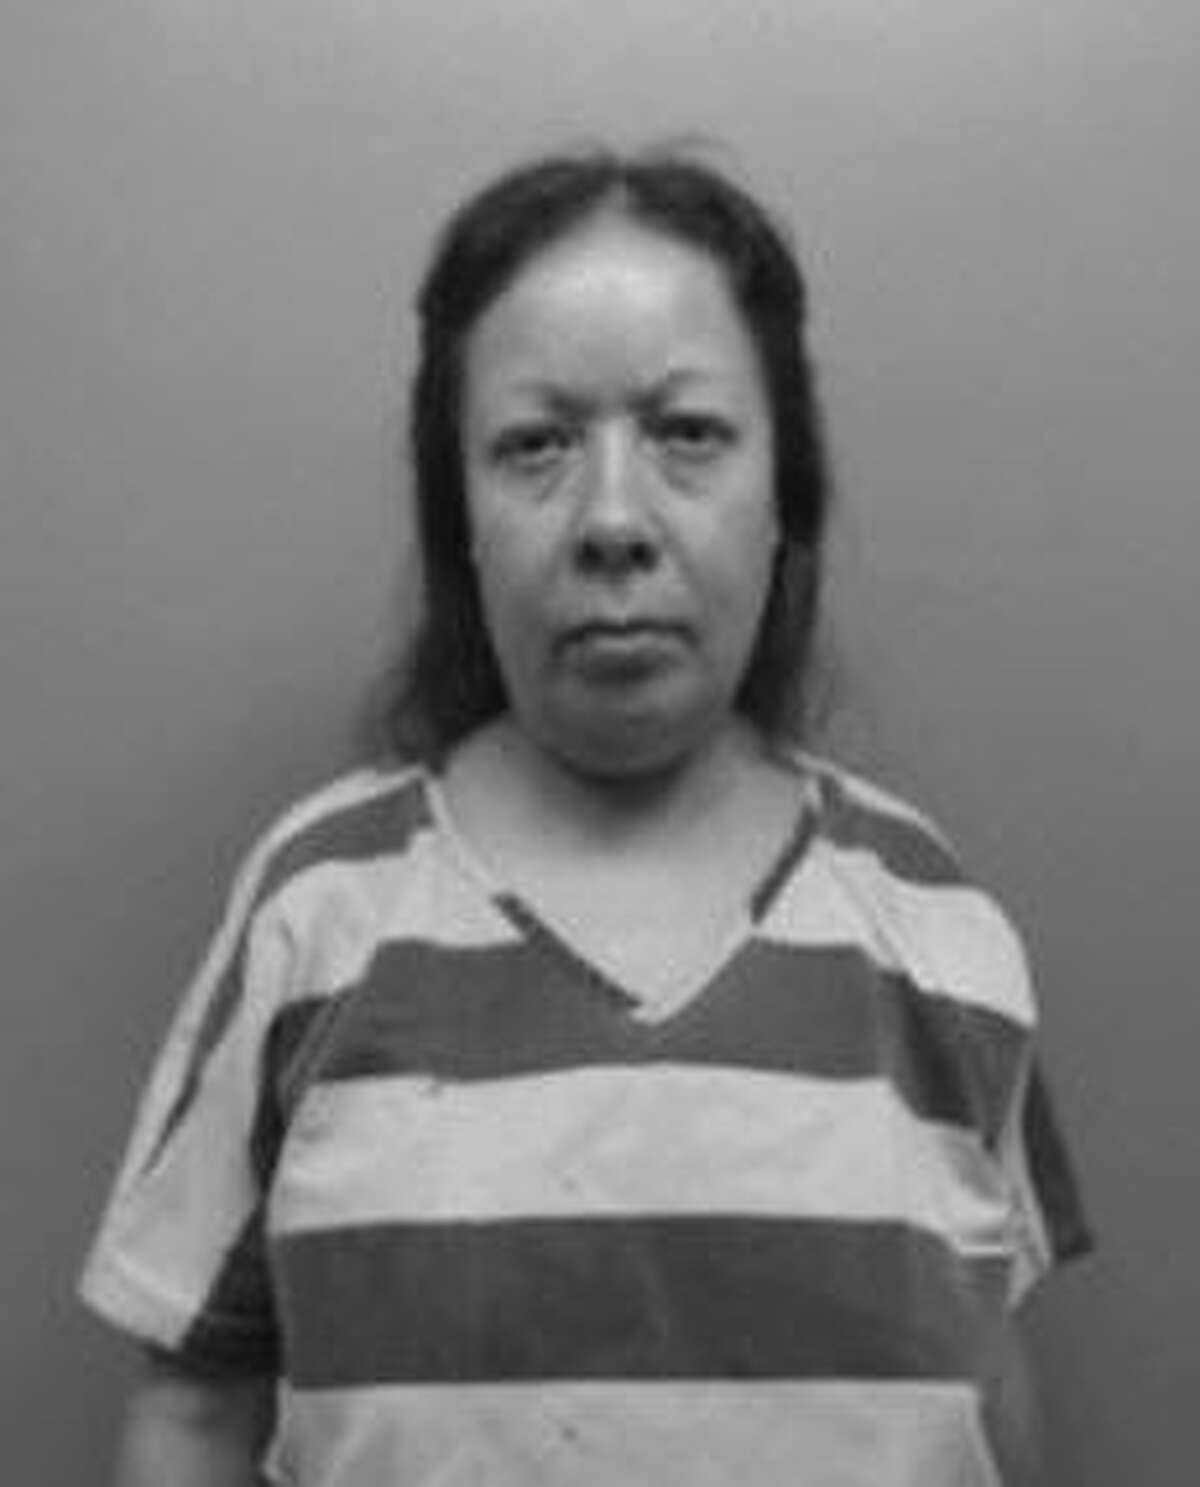 Elva Rosa Gonzalez, 49, was charged Tuesday, June 13, with making a false report to police, a Class B misdemeanor.